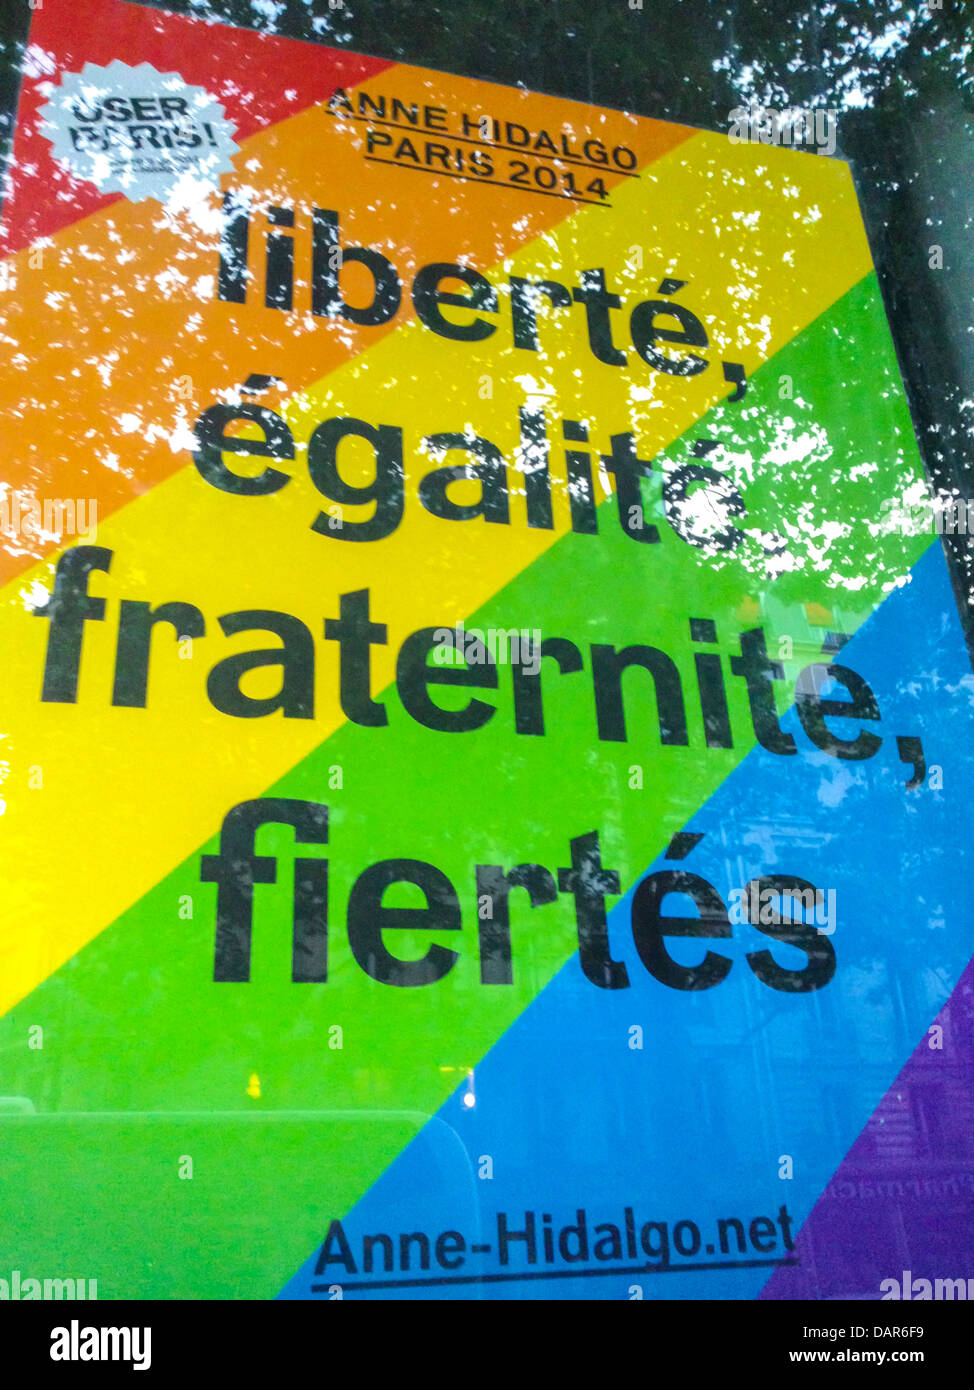 Paris, France, Window of French Socialist Party Candidate for Mayor Election, with Gay Rainbow Flag, in the Marais, 'Anne Hidalgo',  Iphoneography Photo, Socialist Labor Party Stock Photo